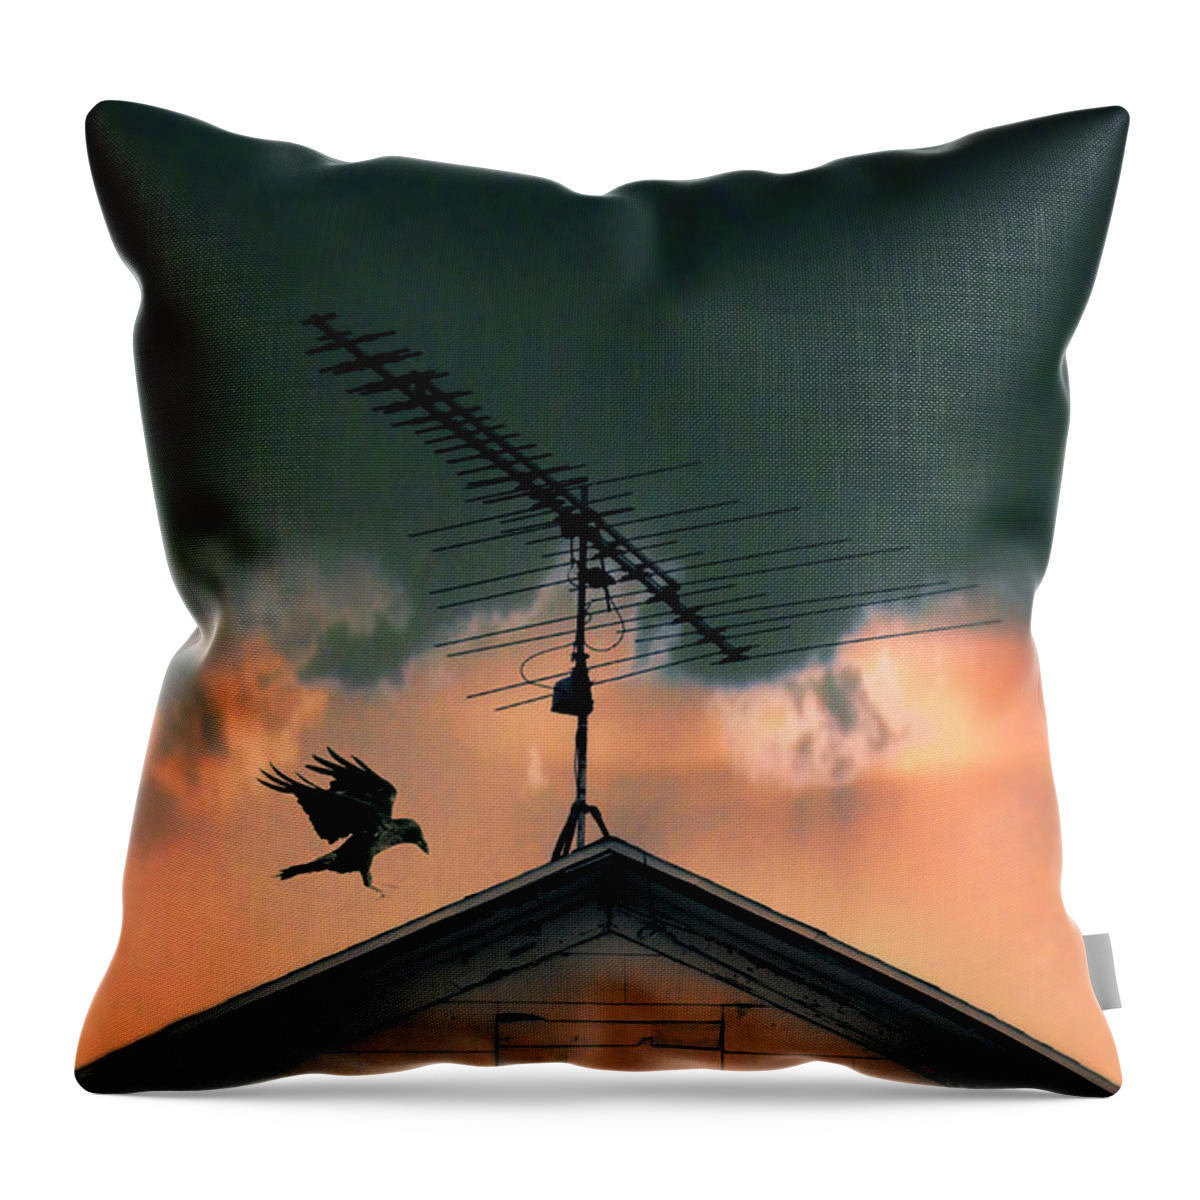 Antenna Throw Pillow featuring the photograph Antenna on Old House with Raven by Jill Battaglia